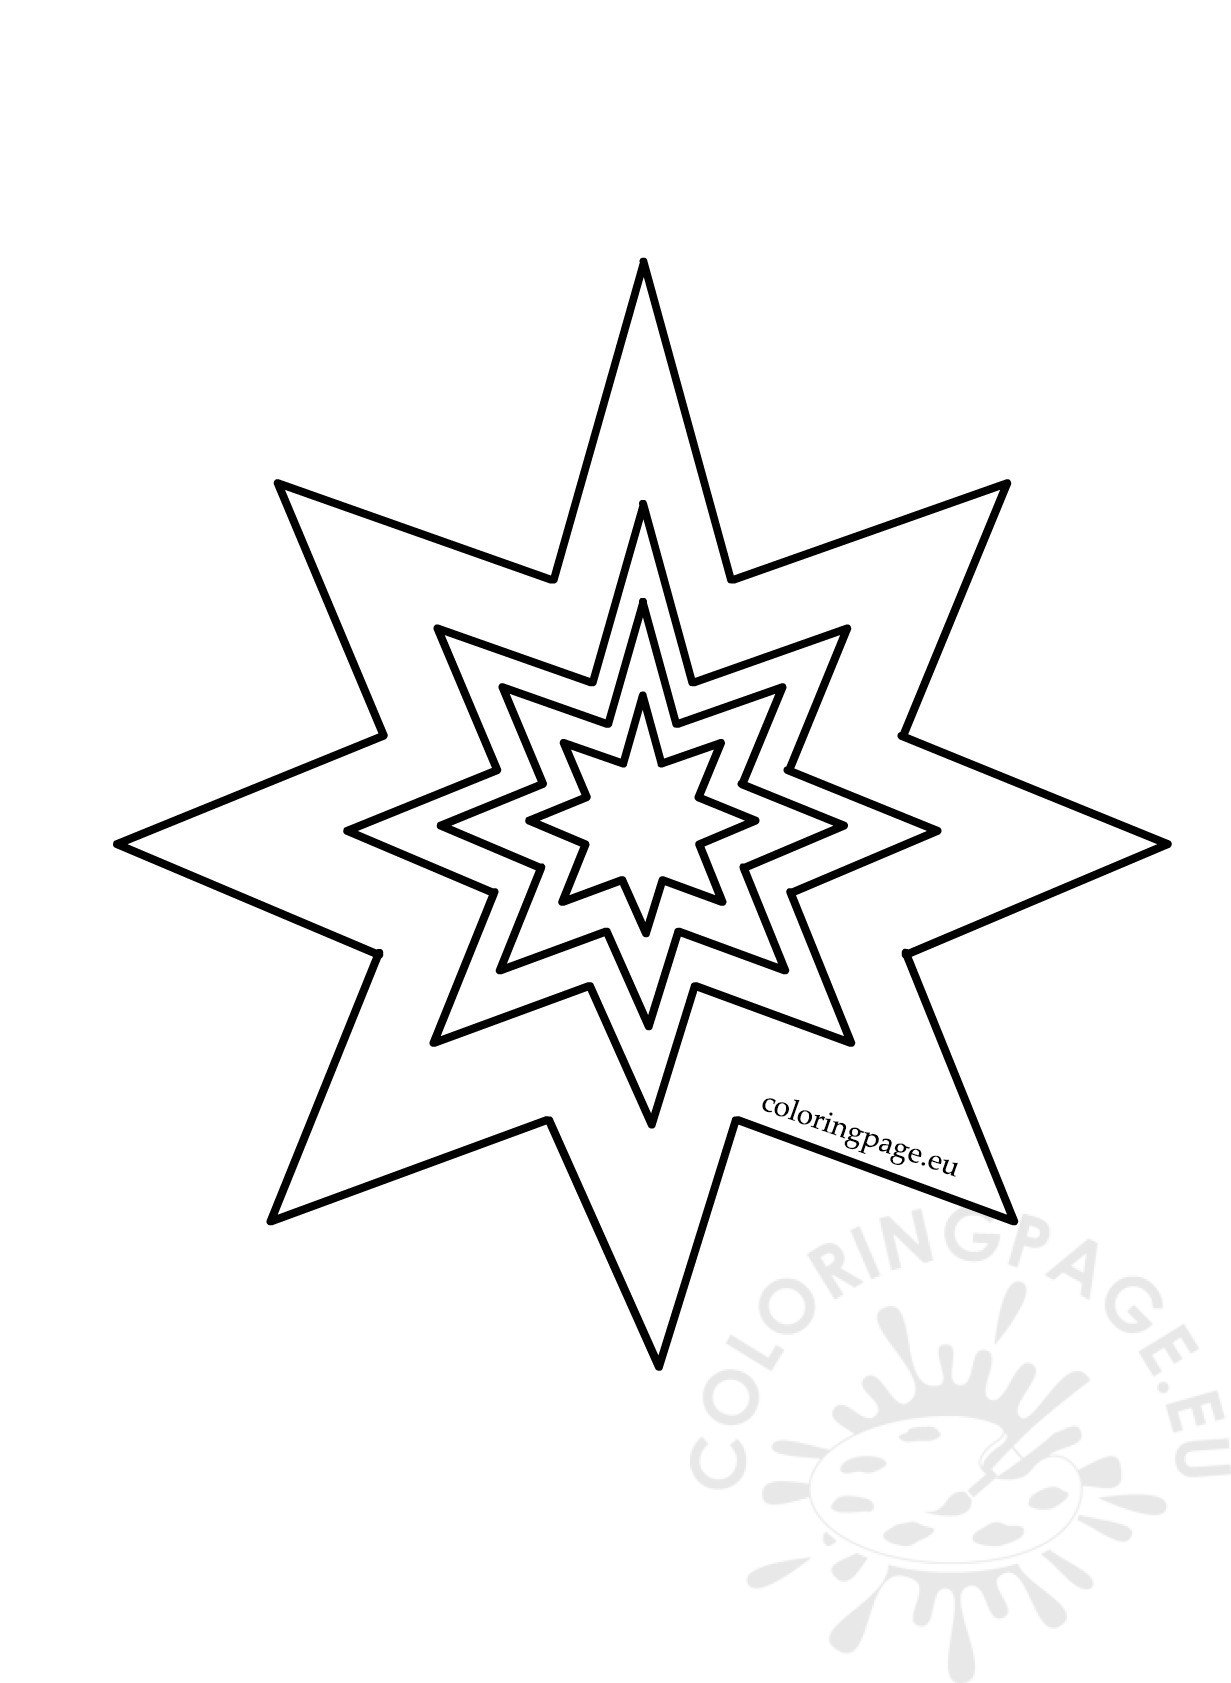 eight pointed star pattern